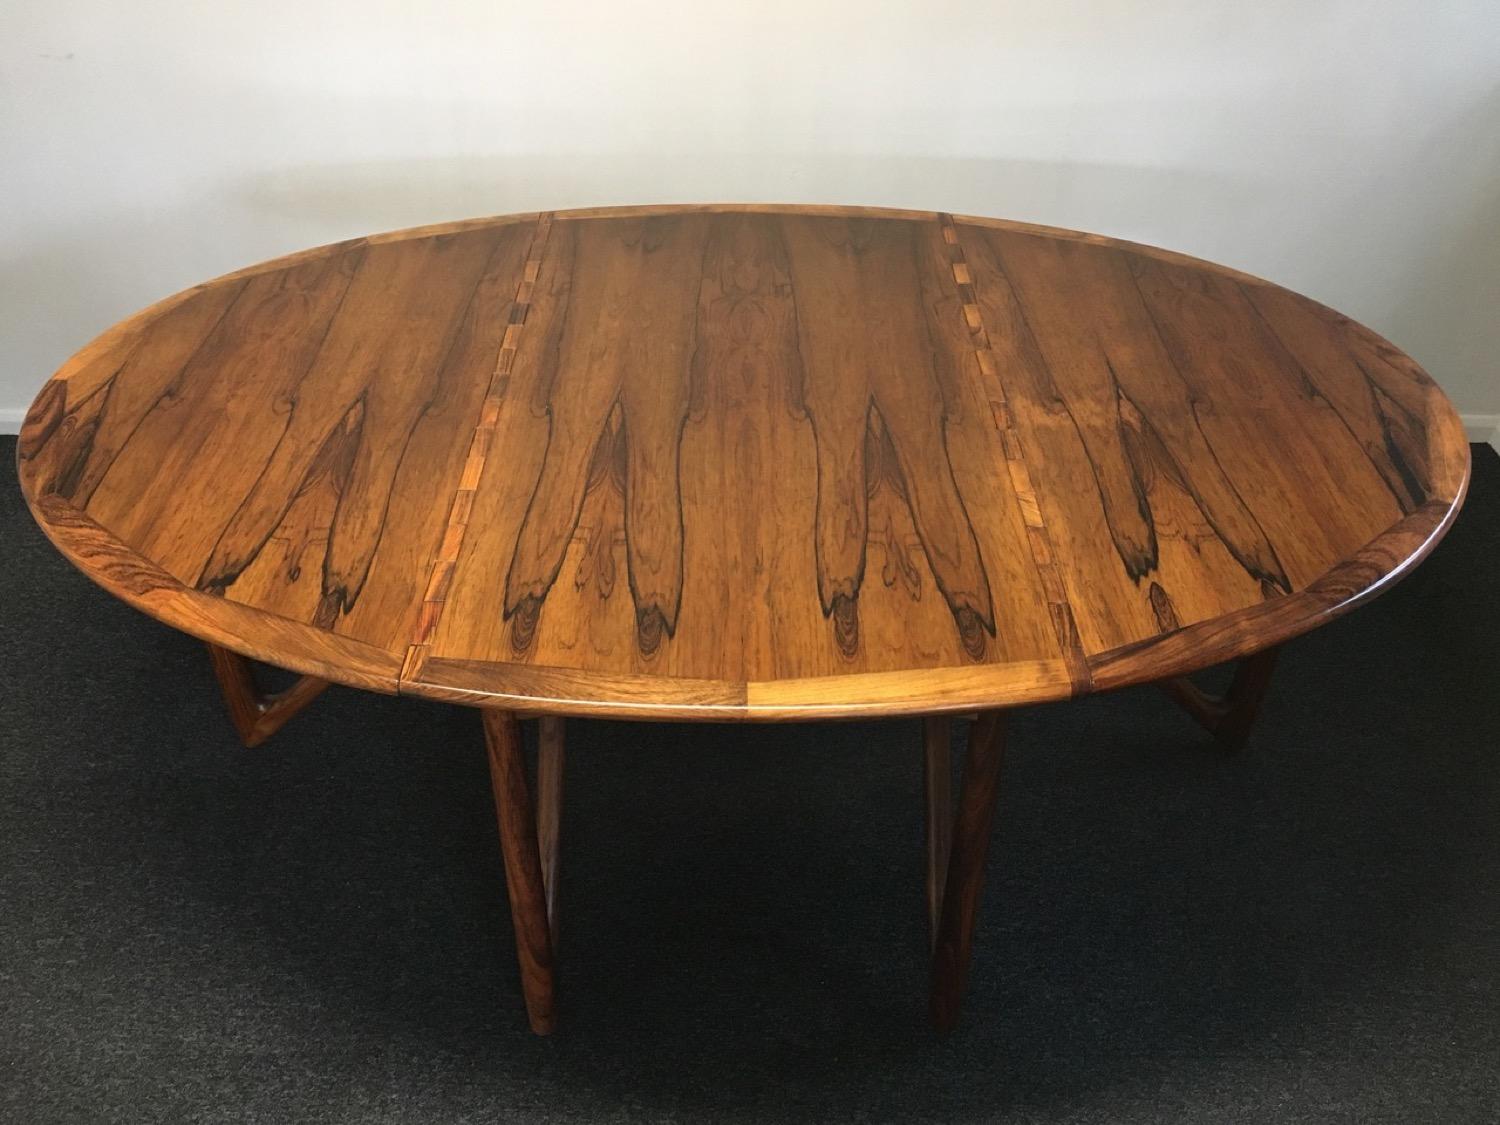 A 1960s Rosewood gate-leg drop-leaf dining table designed by Kurt Ostervig and manufactured by Jason Møbler. The table is beautifully restored with the most incredible grain and patina. The table is oval when both leaves are fully extended over the